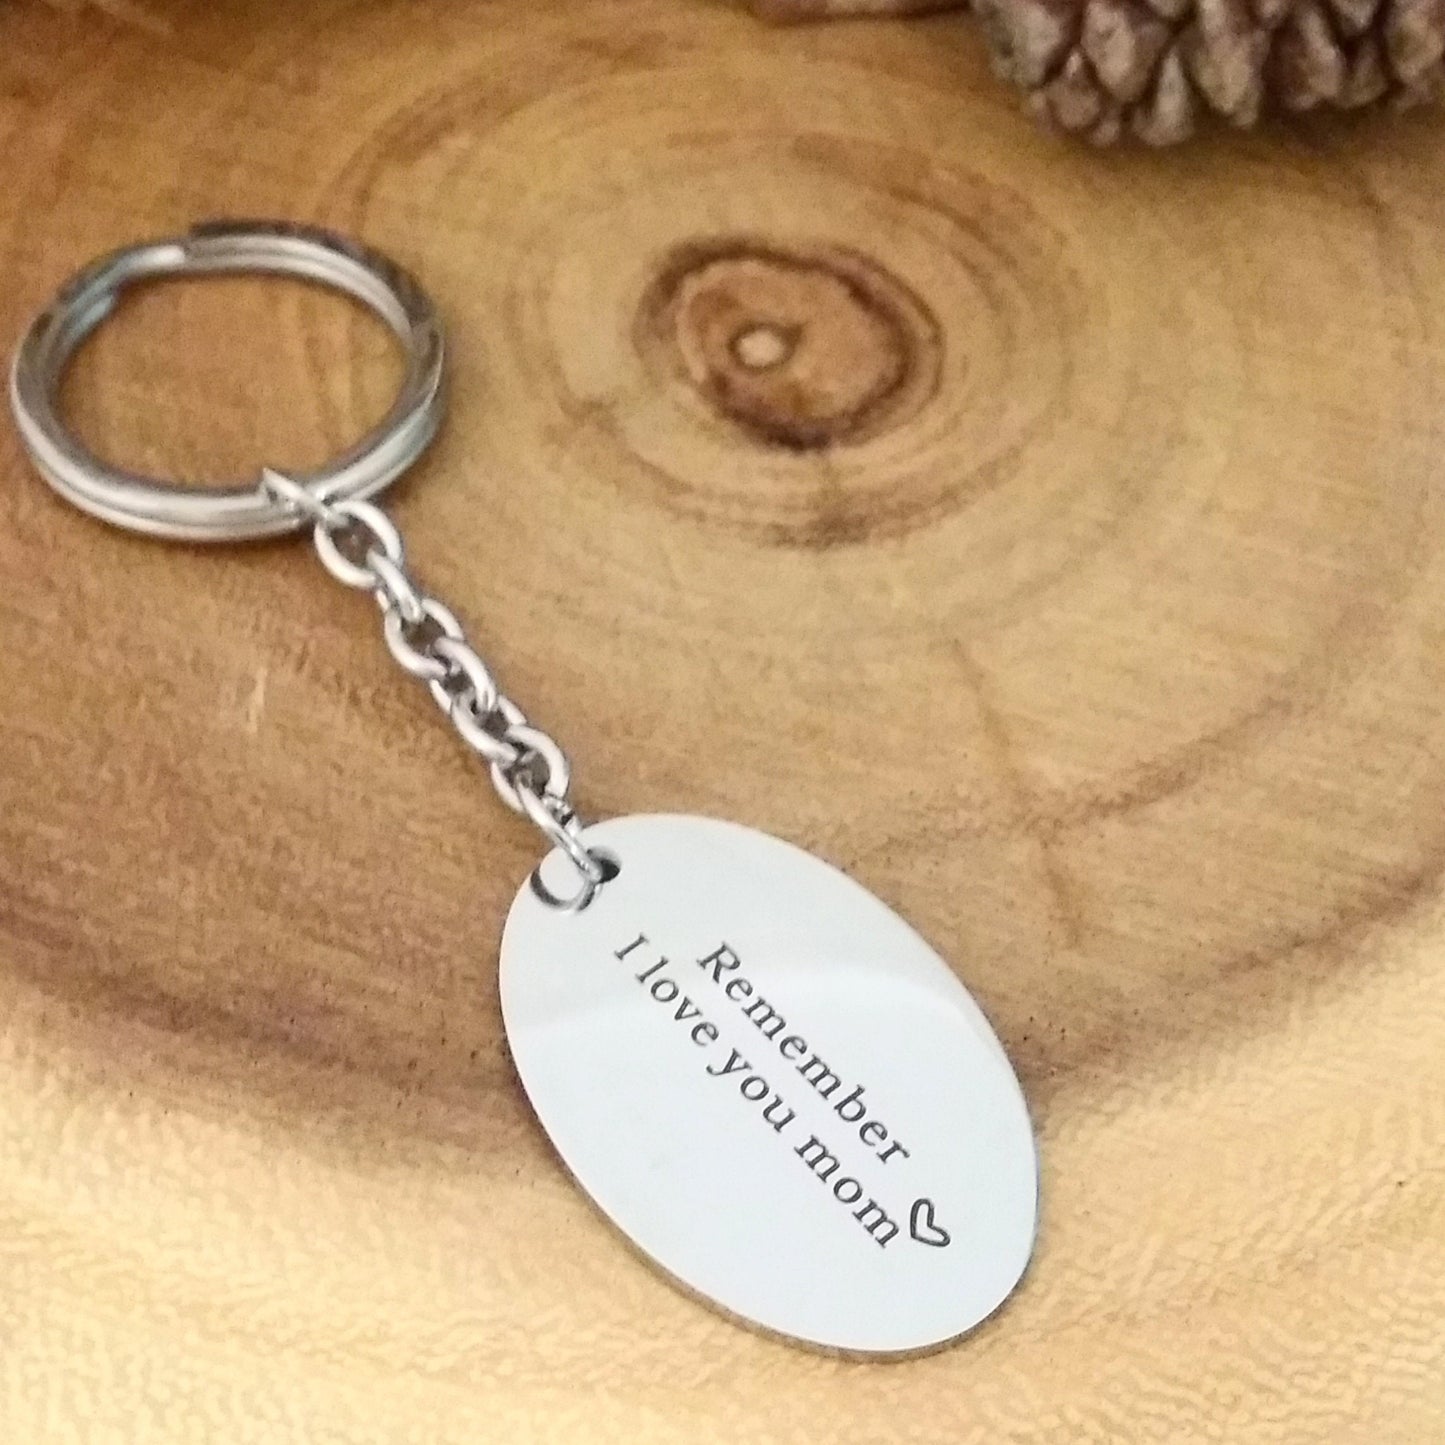 I love you mom - message engraved on keychain in silver